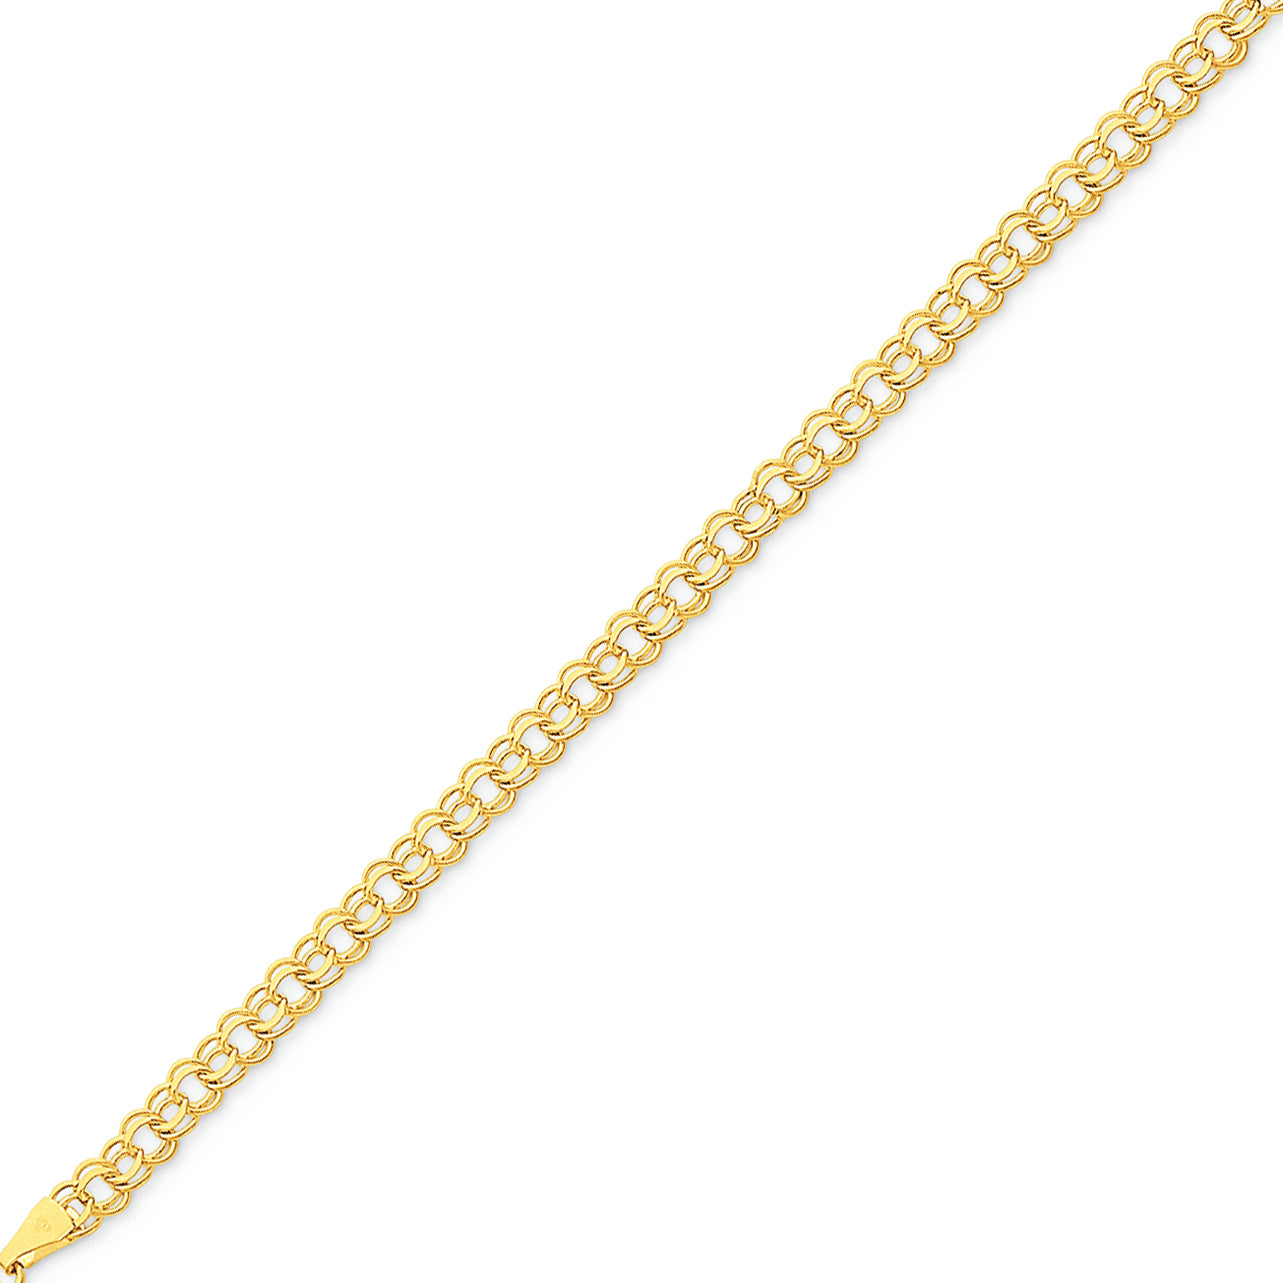 14K Gold Double Link Charm Bracelet 7 Inches